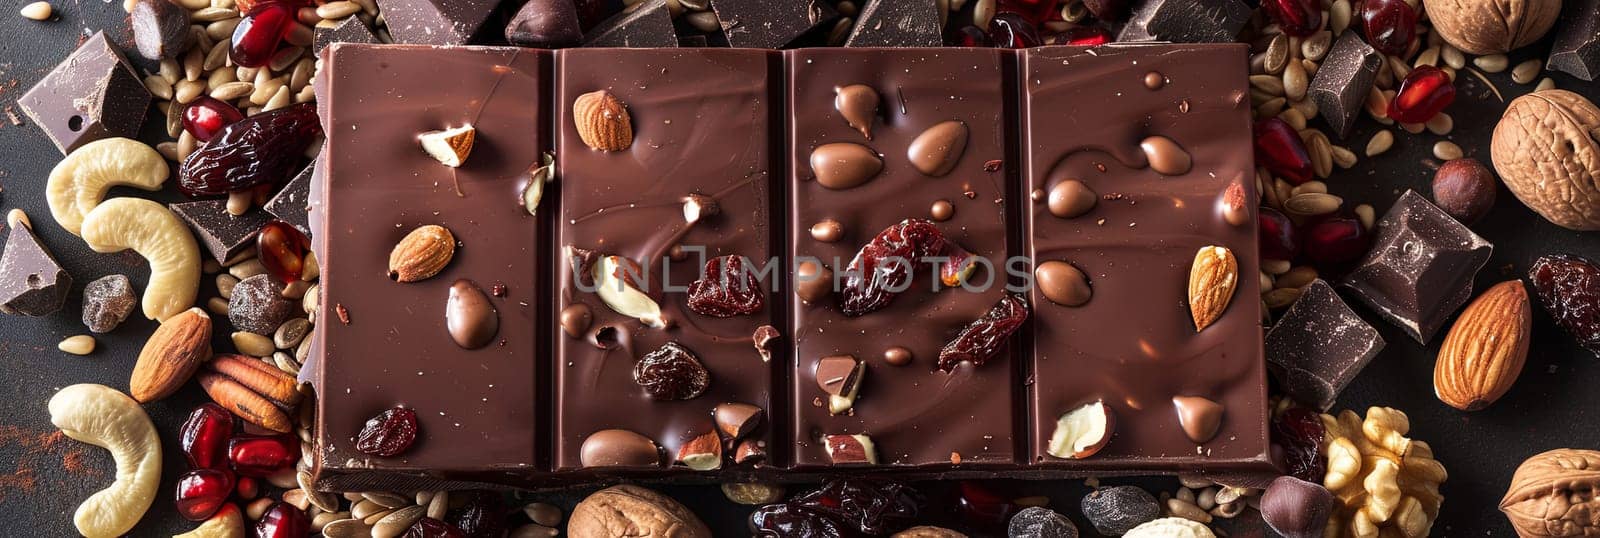 A bar of chocolate topped with a variety of nuts and cranberries, creating a delicious and textured treat.